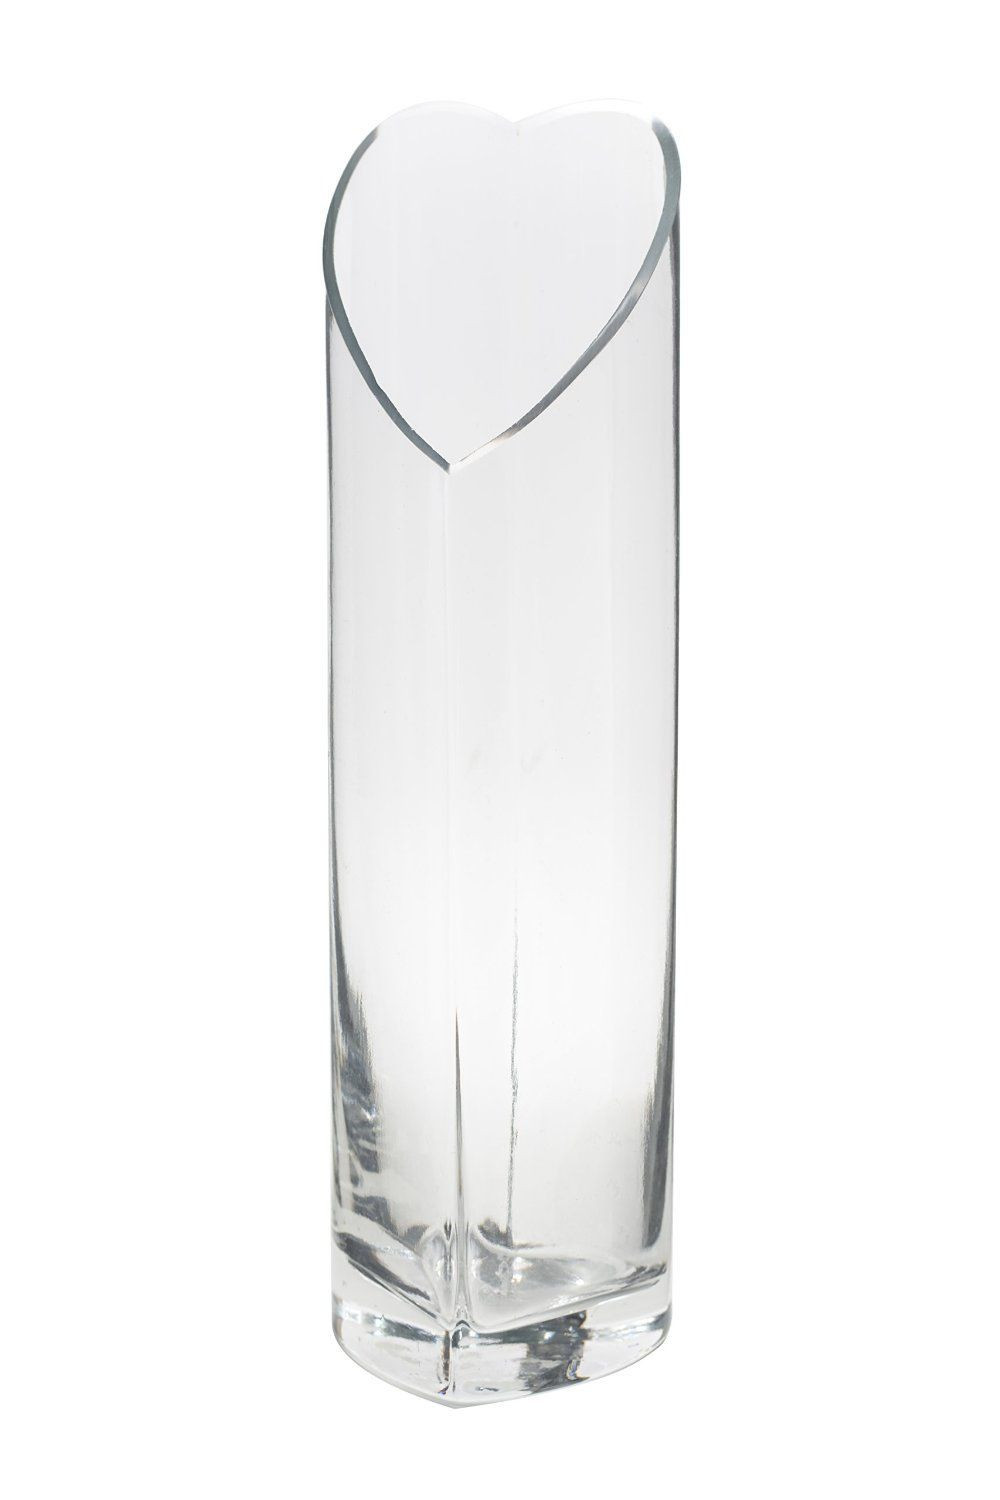 clear round glass vases wholesale of 19 best of small rectangle glass vase bogekompresorturkiye com pertaining to amazon decorative flower glass vase by royal imports great use at home or wedding centerpieces 12